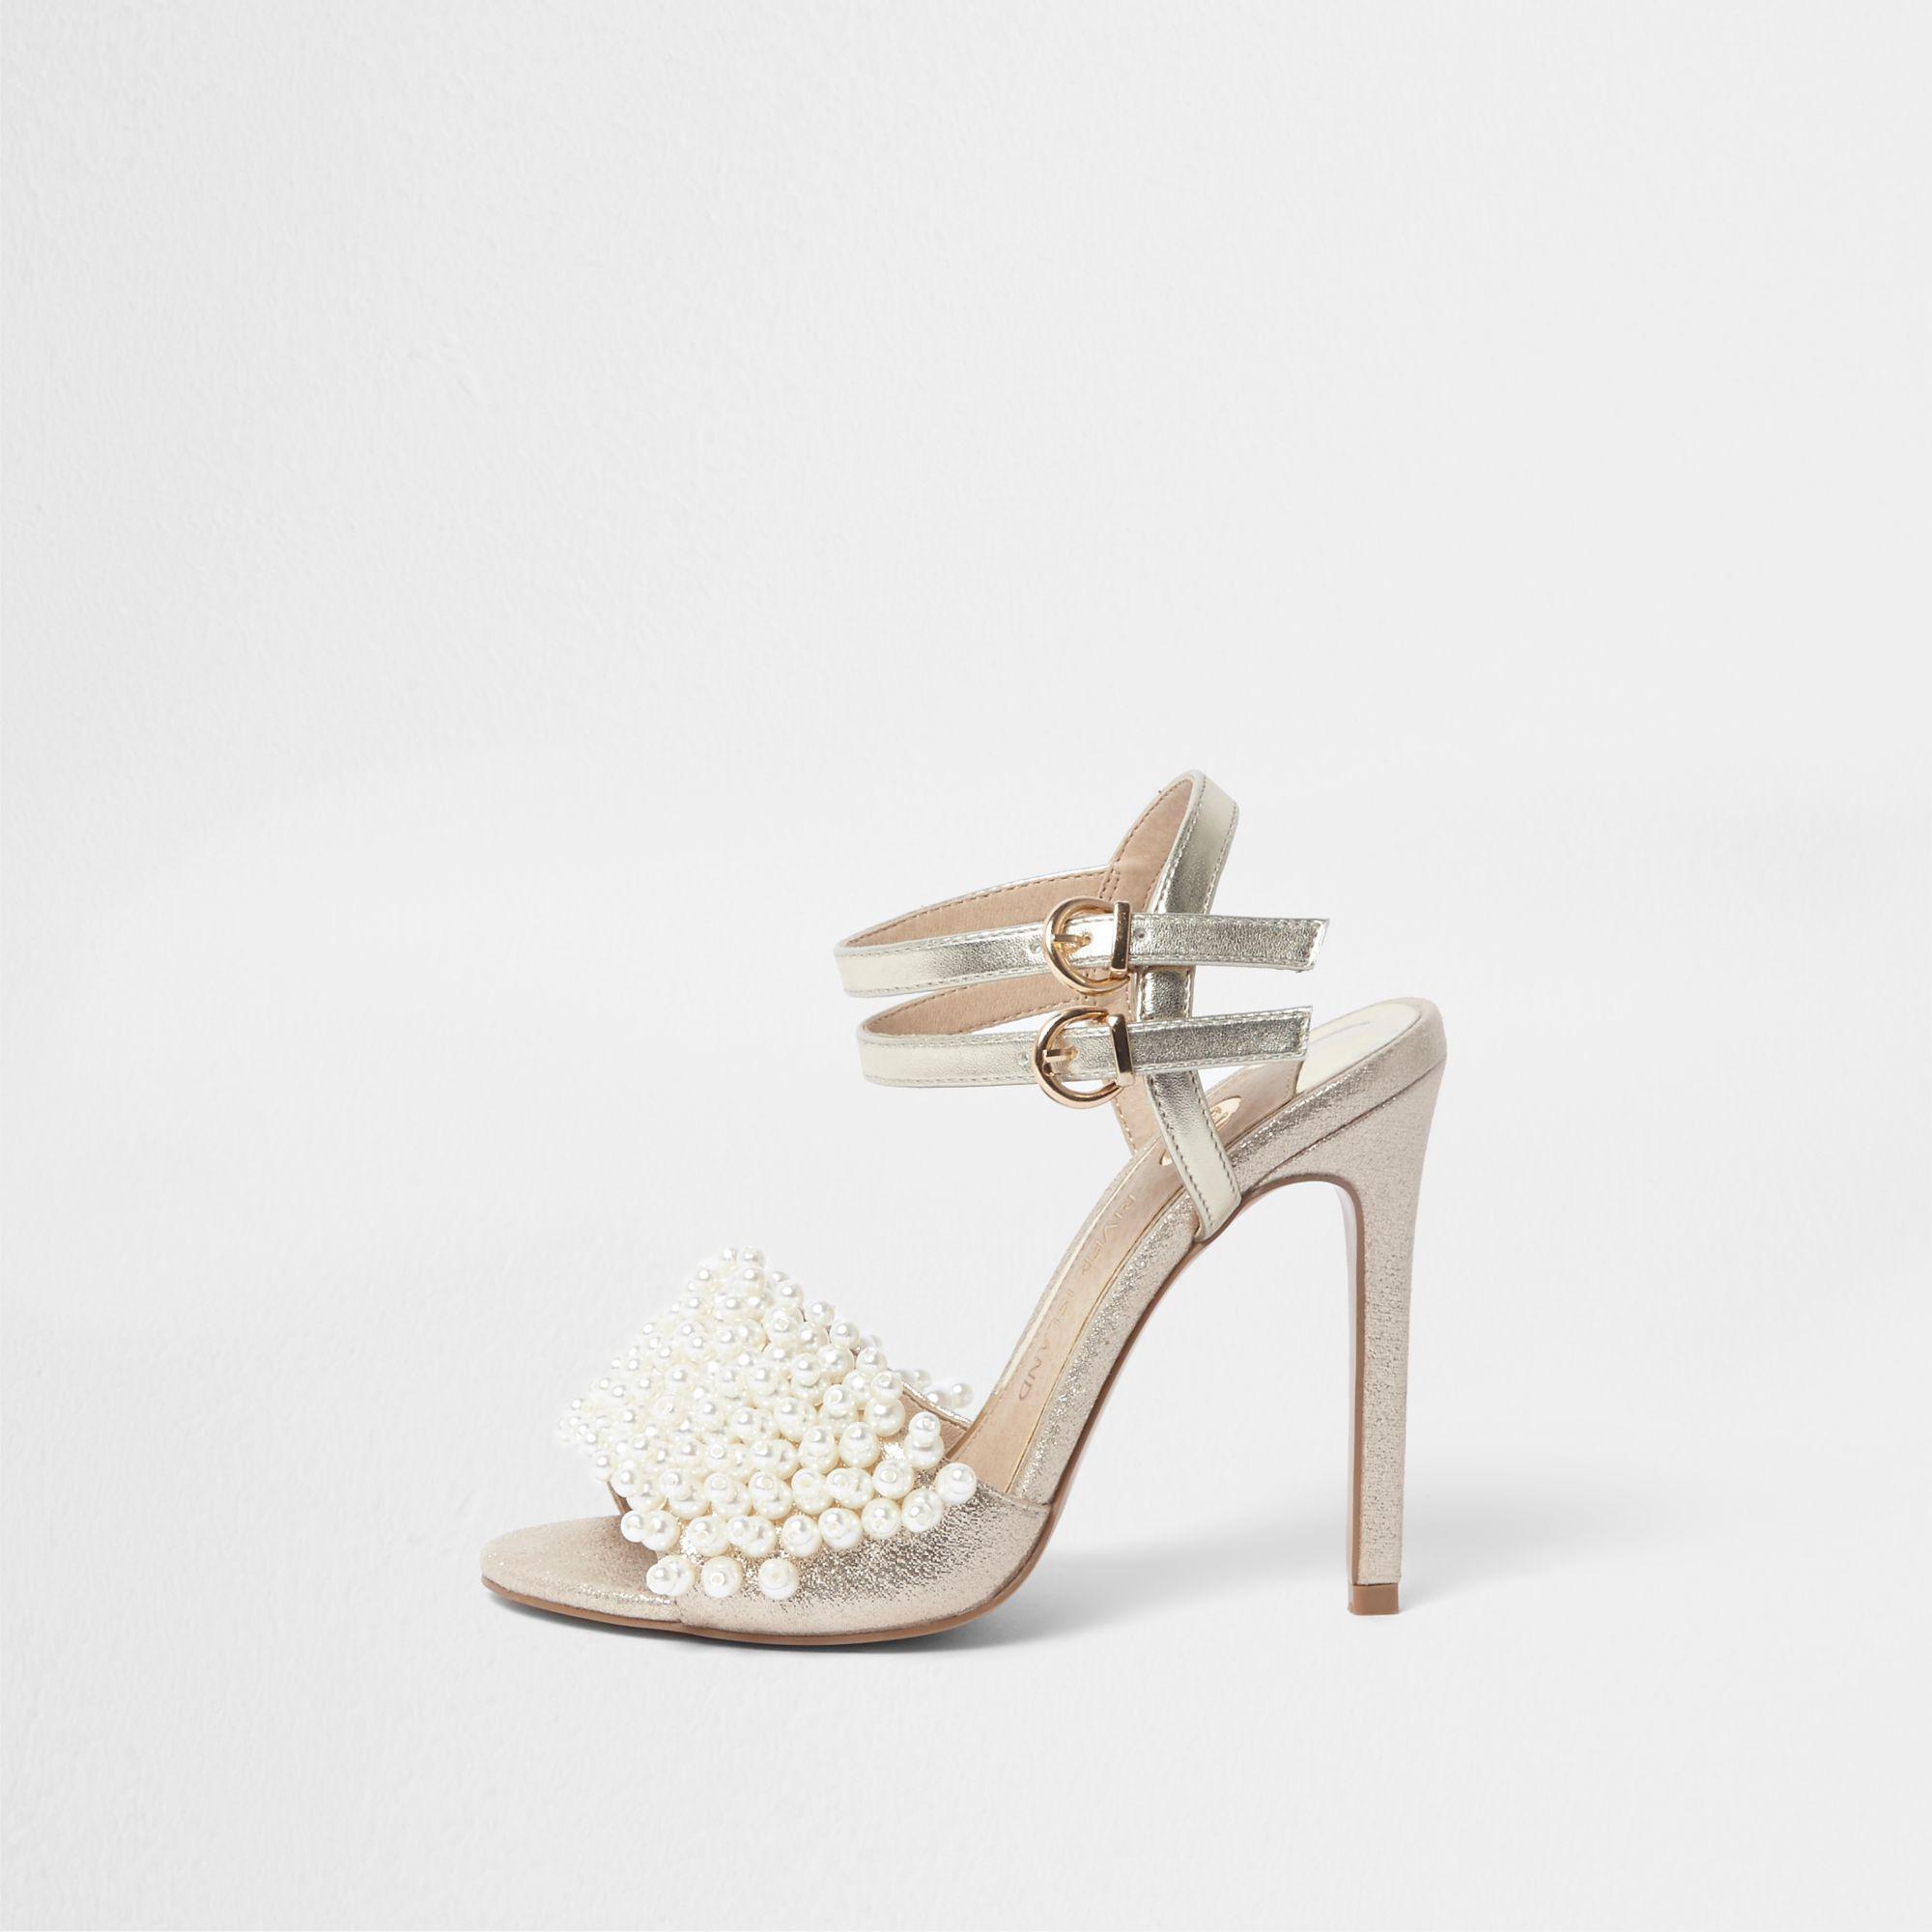 River Island Gold Faux Pearl Vamp Strappy Heeled Sandals in Metallic | Lyst